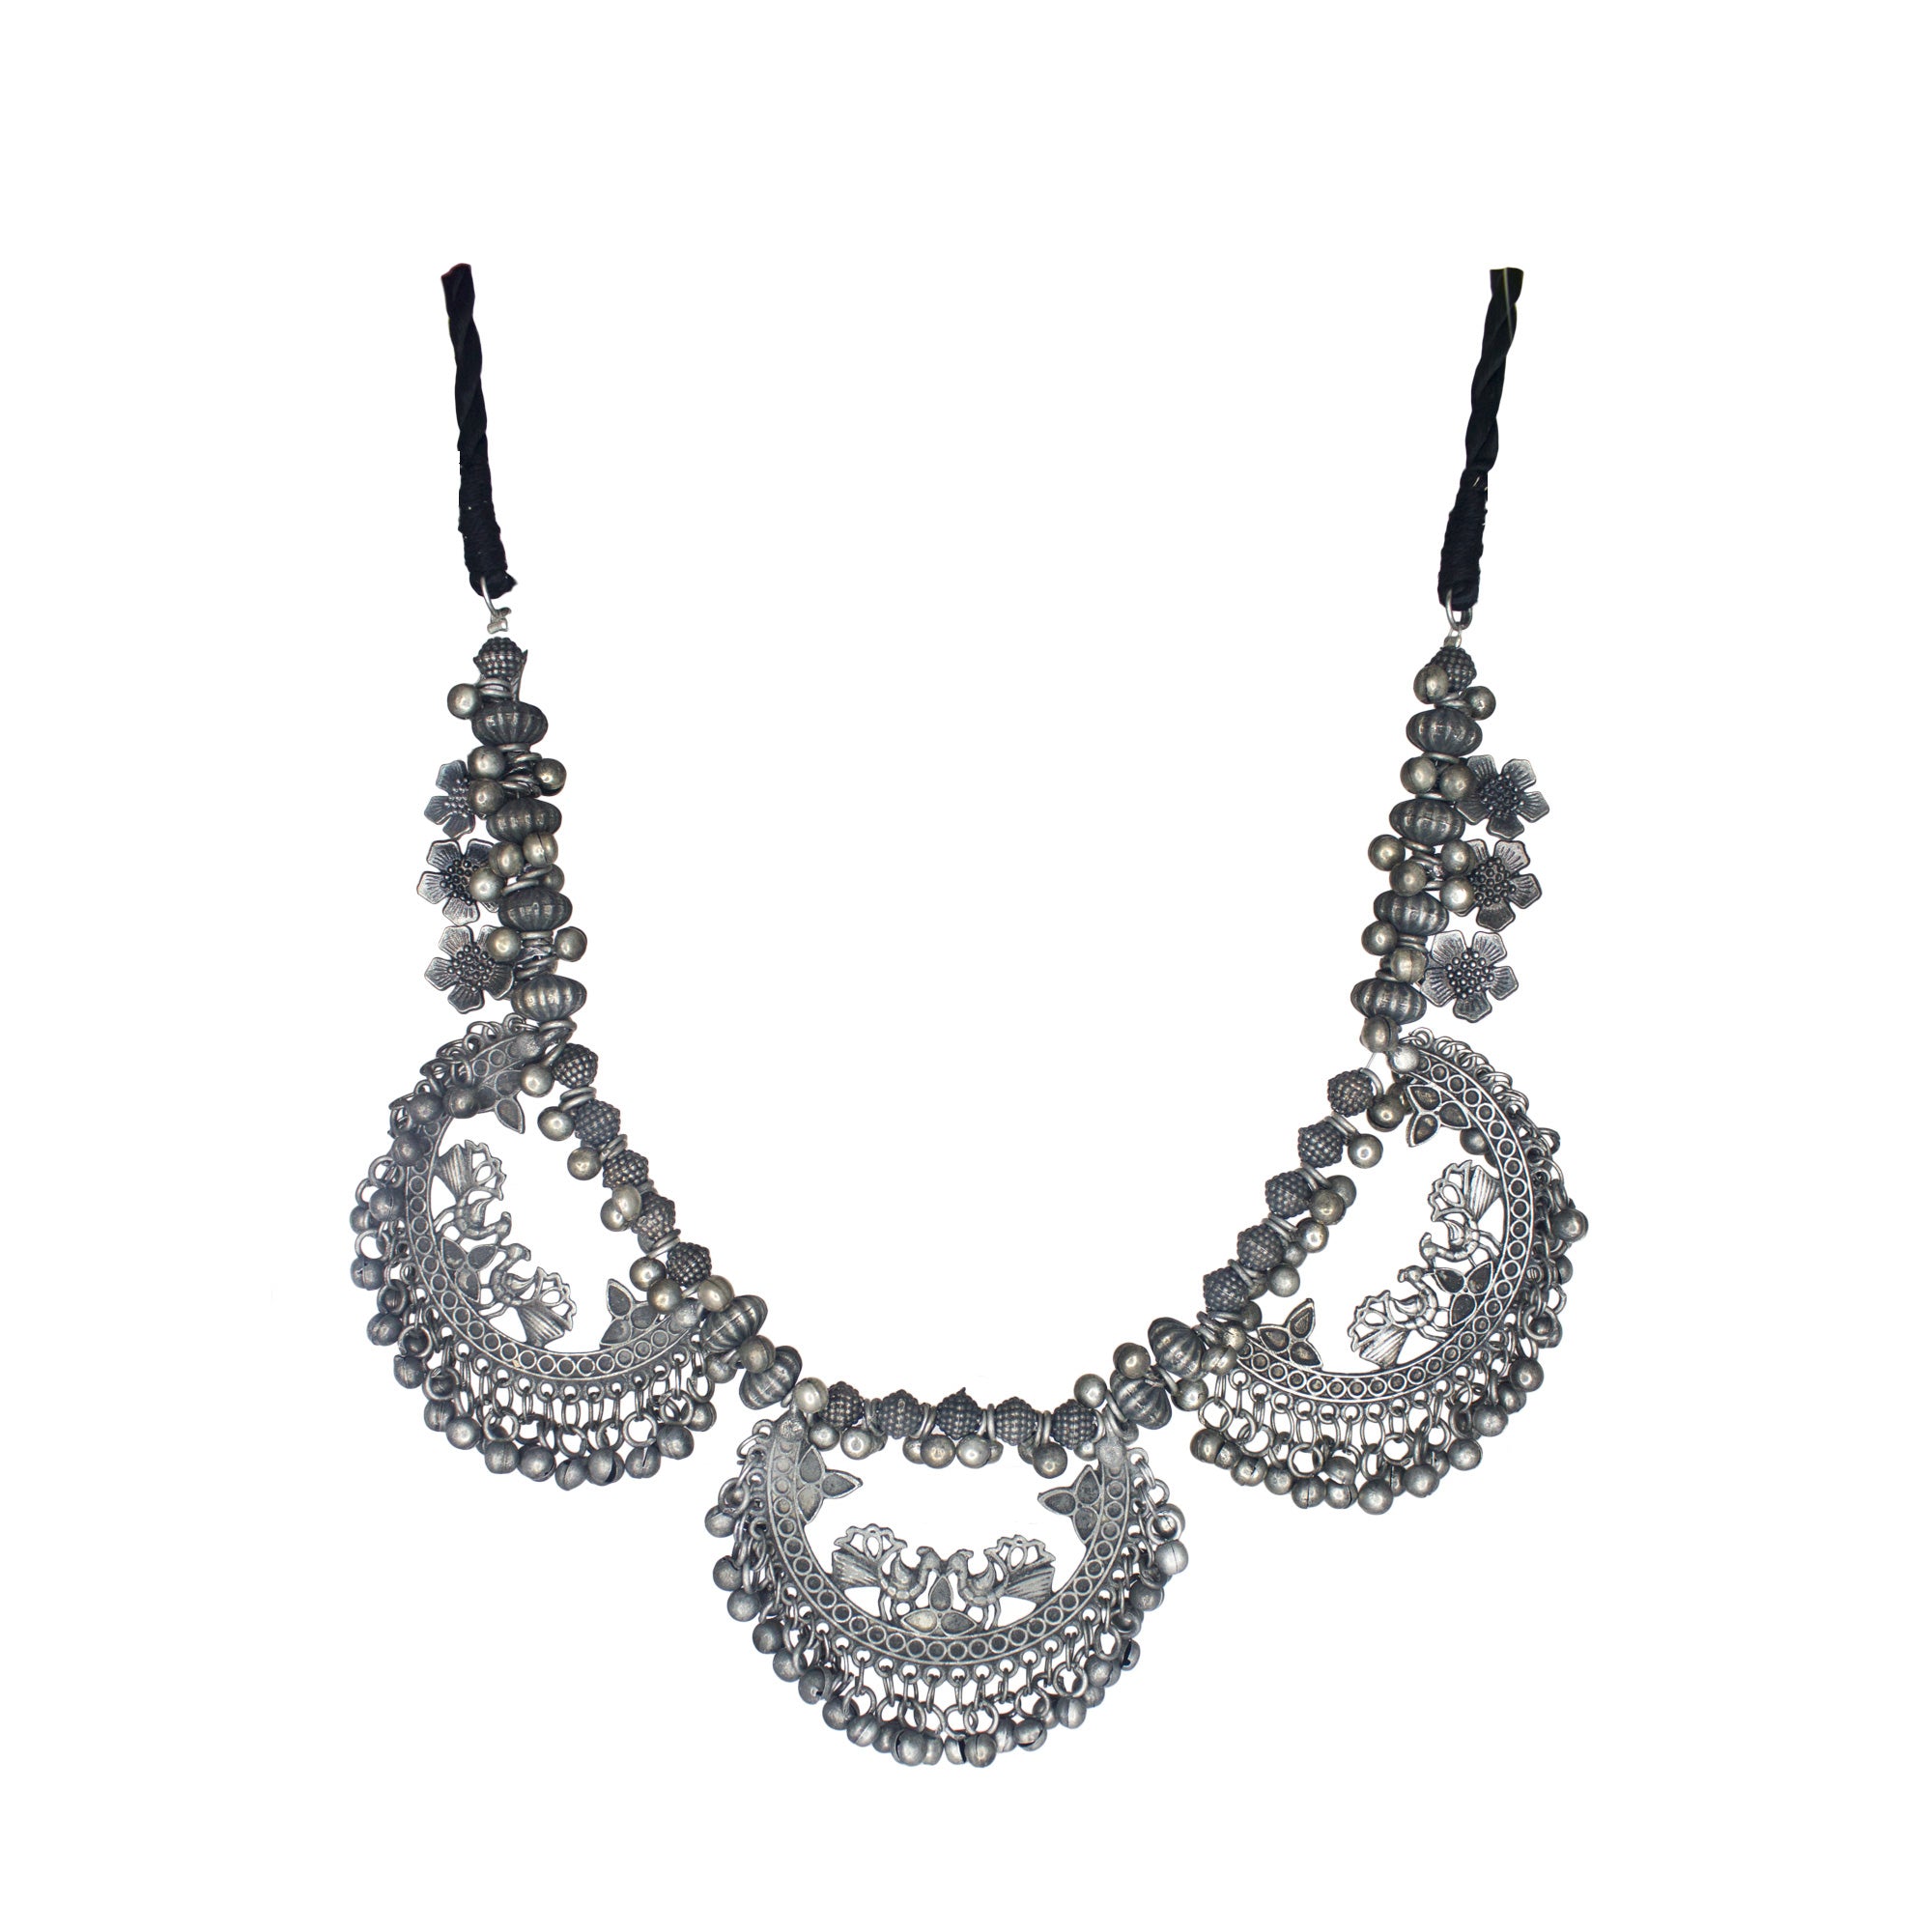 Abhinn Silver Oxidised Peacock And Floral Design Necklace for Women